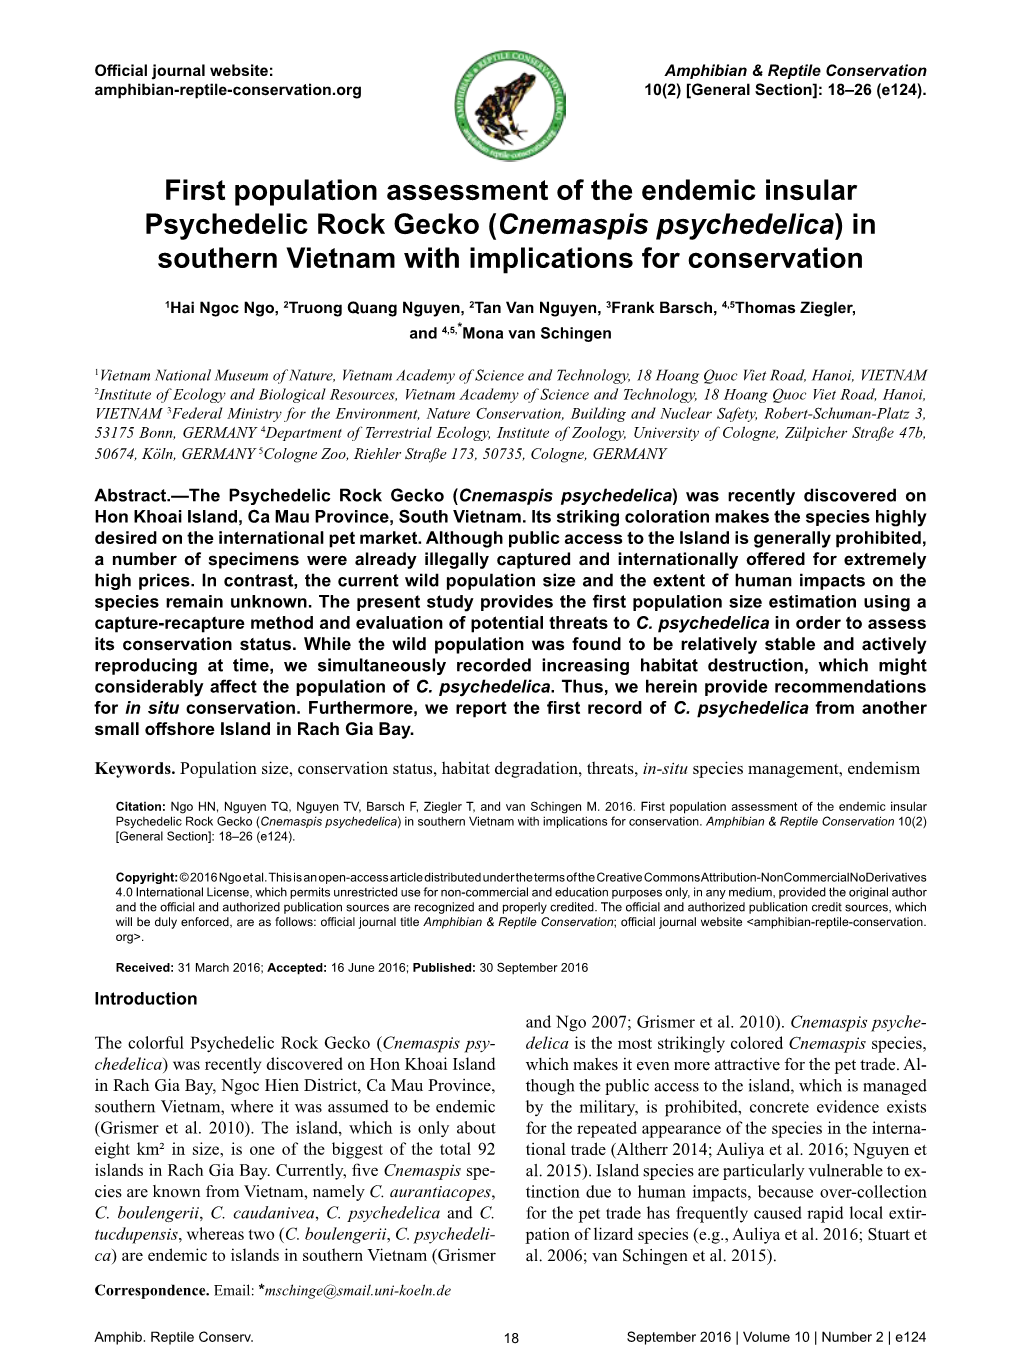 Cnemaspis Psychedelica) in Southern Vietnam with Implications for Conservation